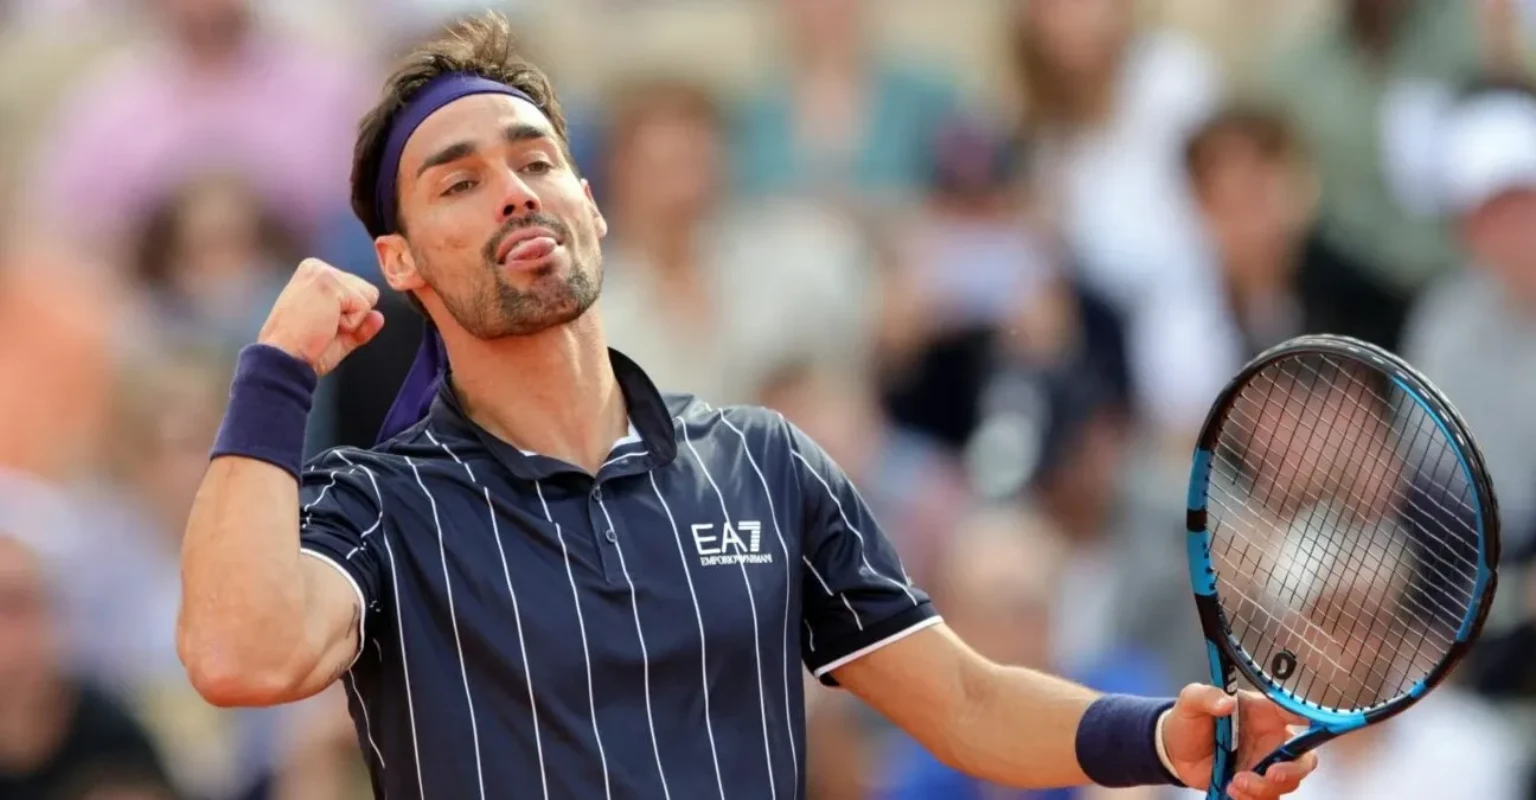 How Tall Is Fabio Fognini? Know About His Height In Feet!